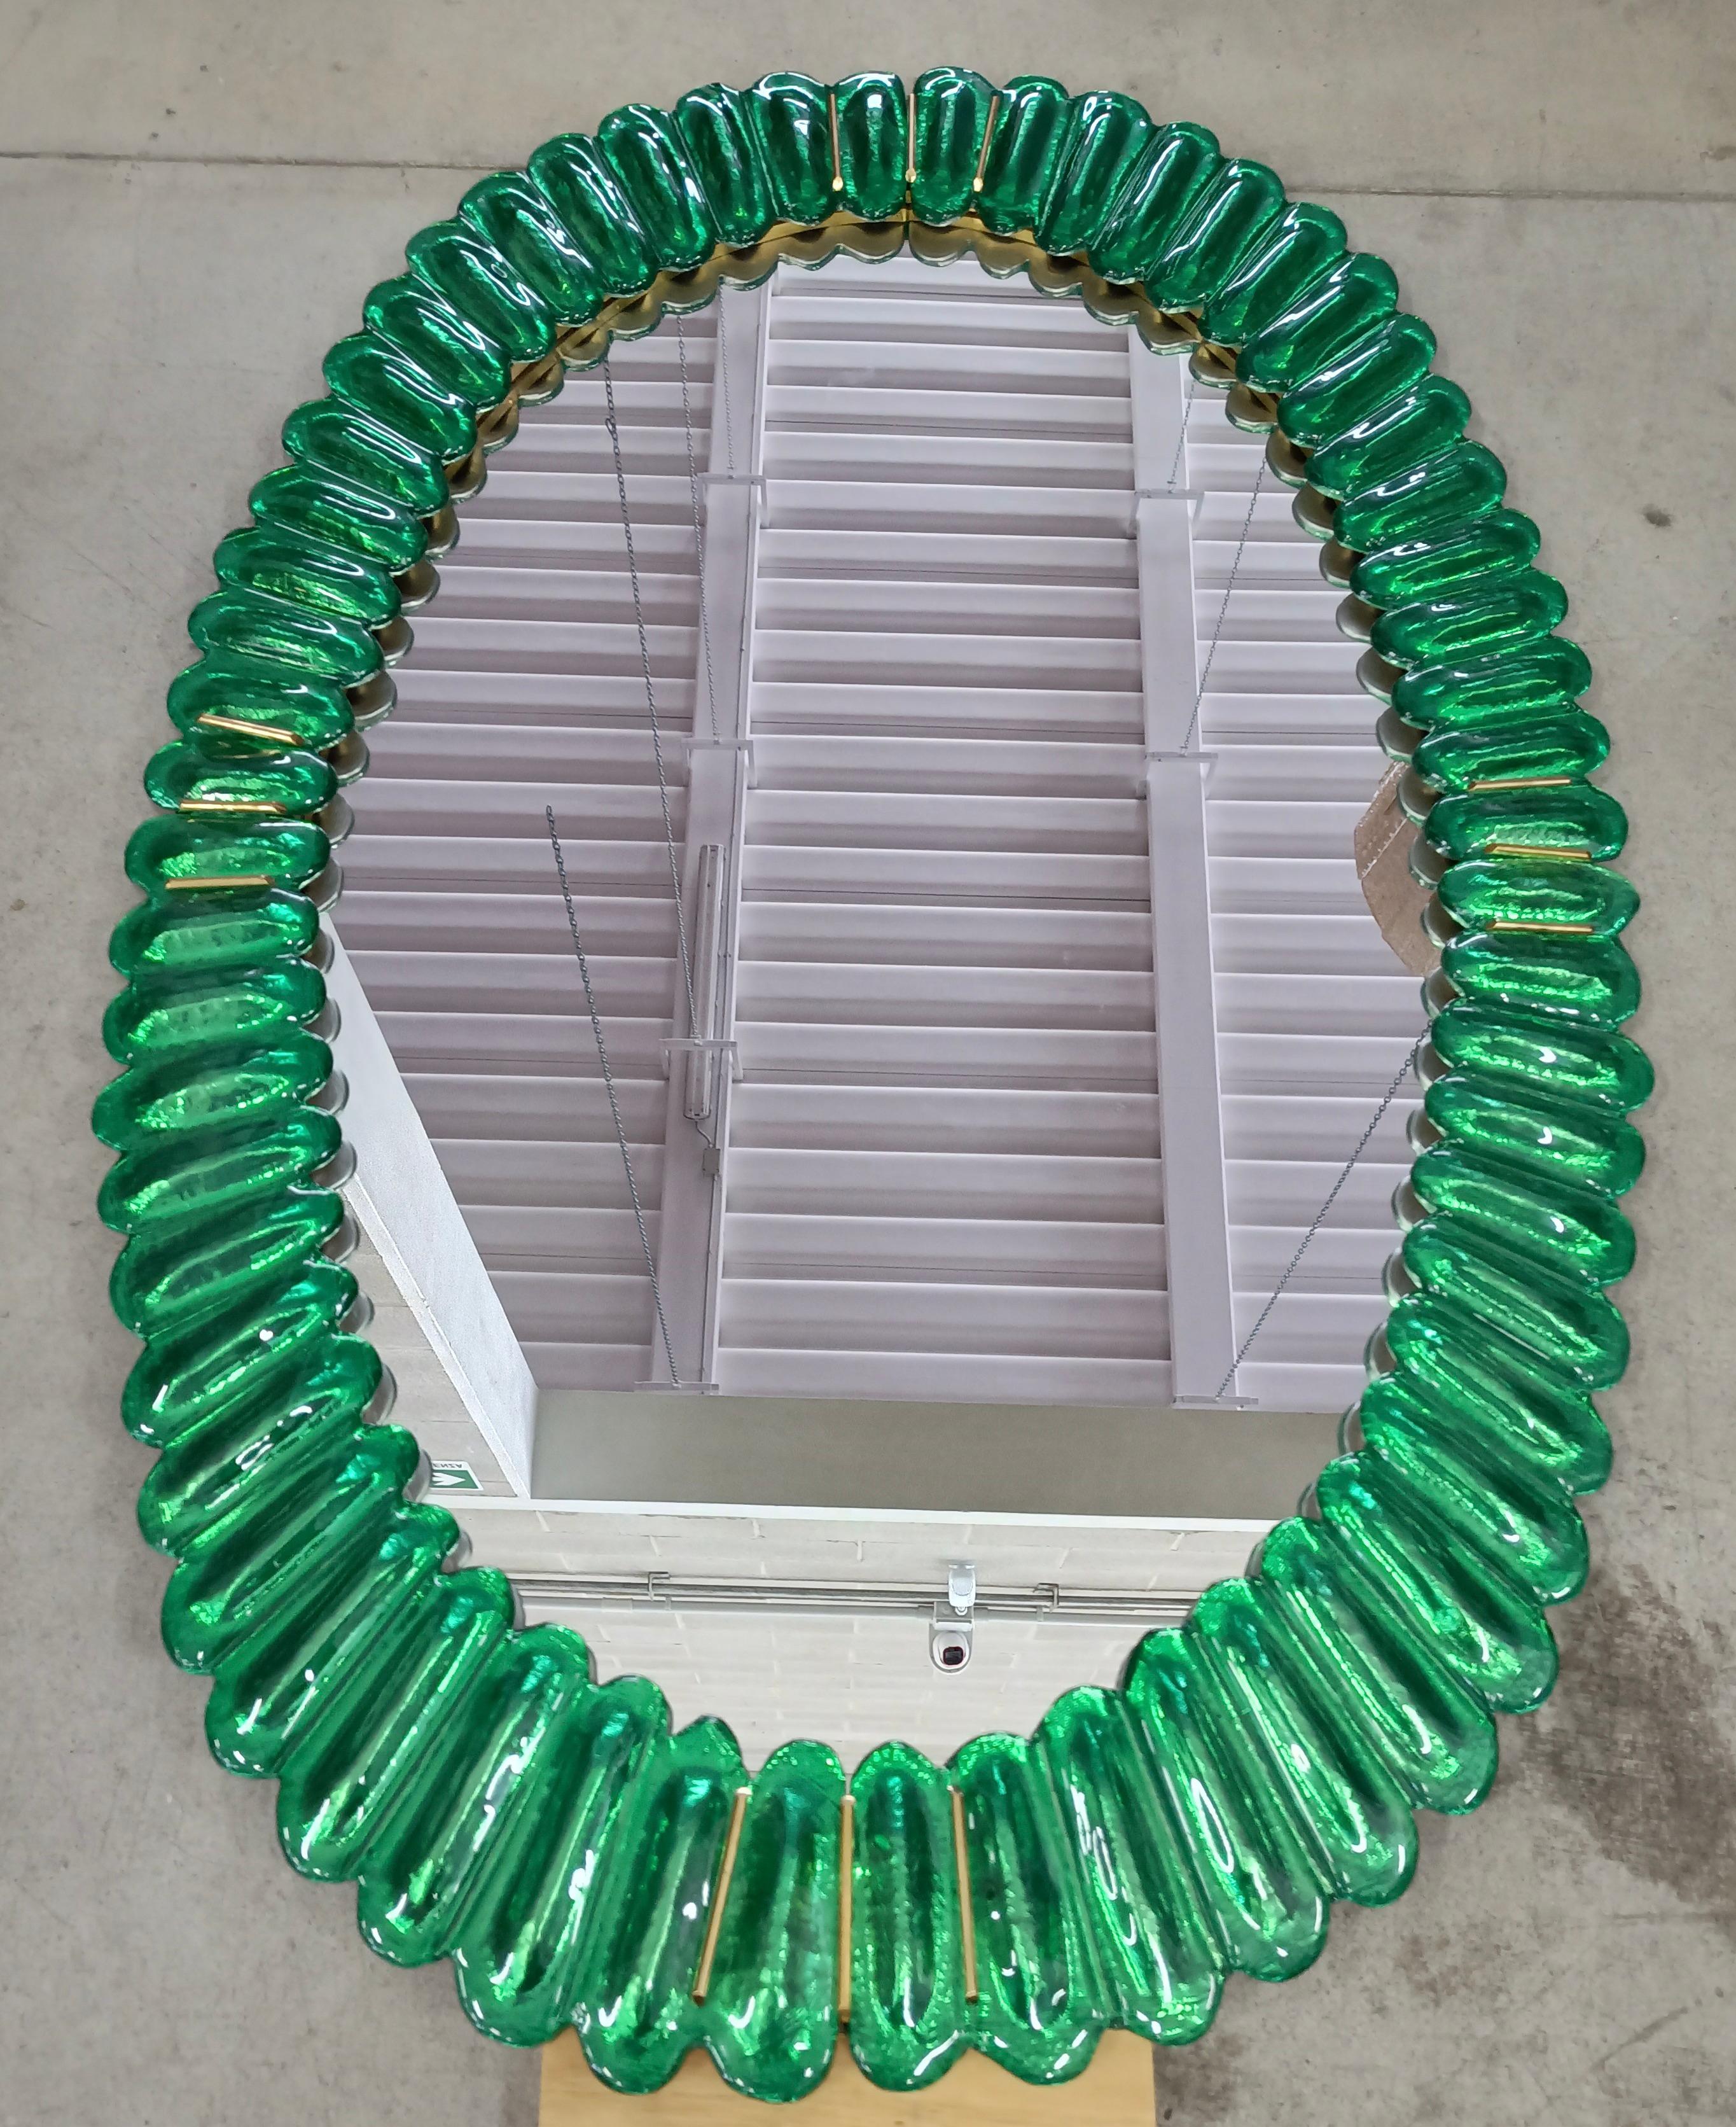 Stunning mirror in blazing Emerald color Murano glass, Venice. A mirror that alone will furnish your home environment.

The mirror has a rear structure in wood, on which four Murano emerald color glass sections are mounted to form an oval as in the